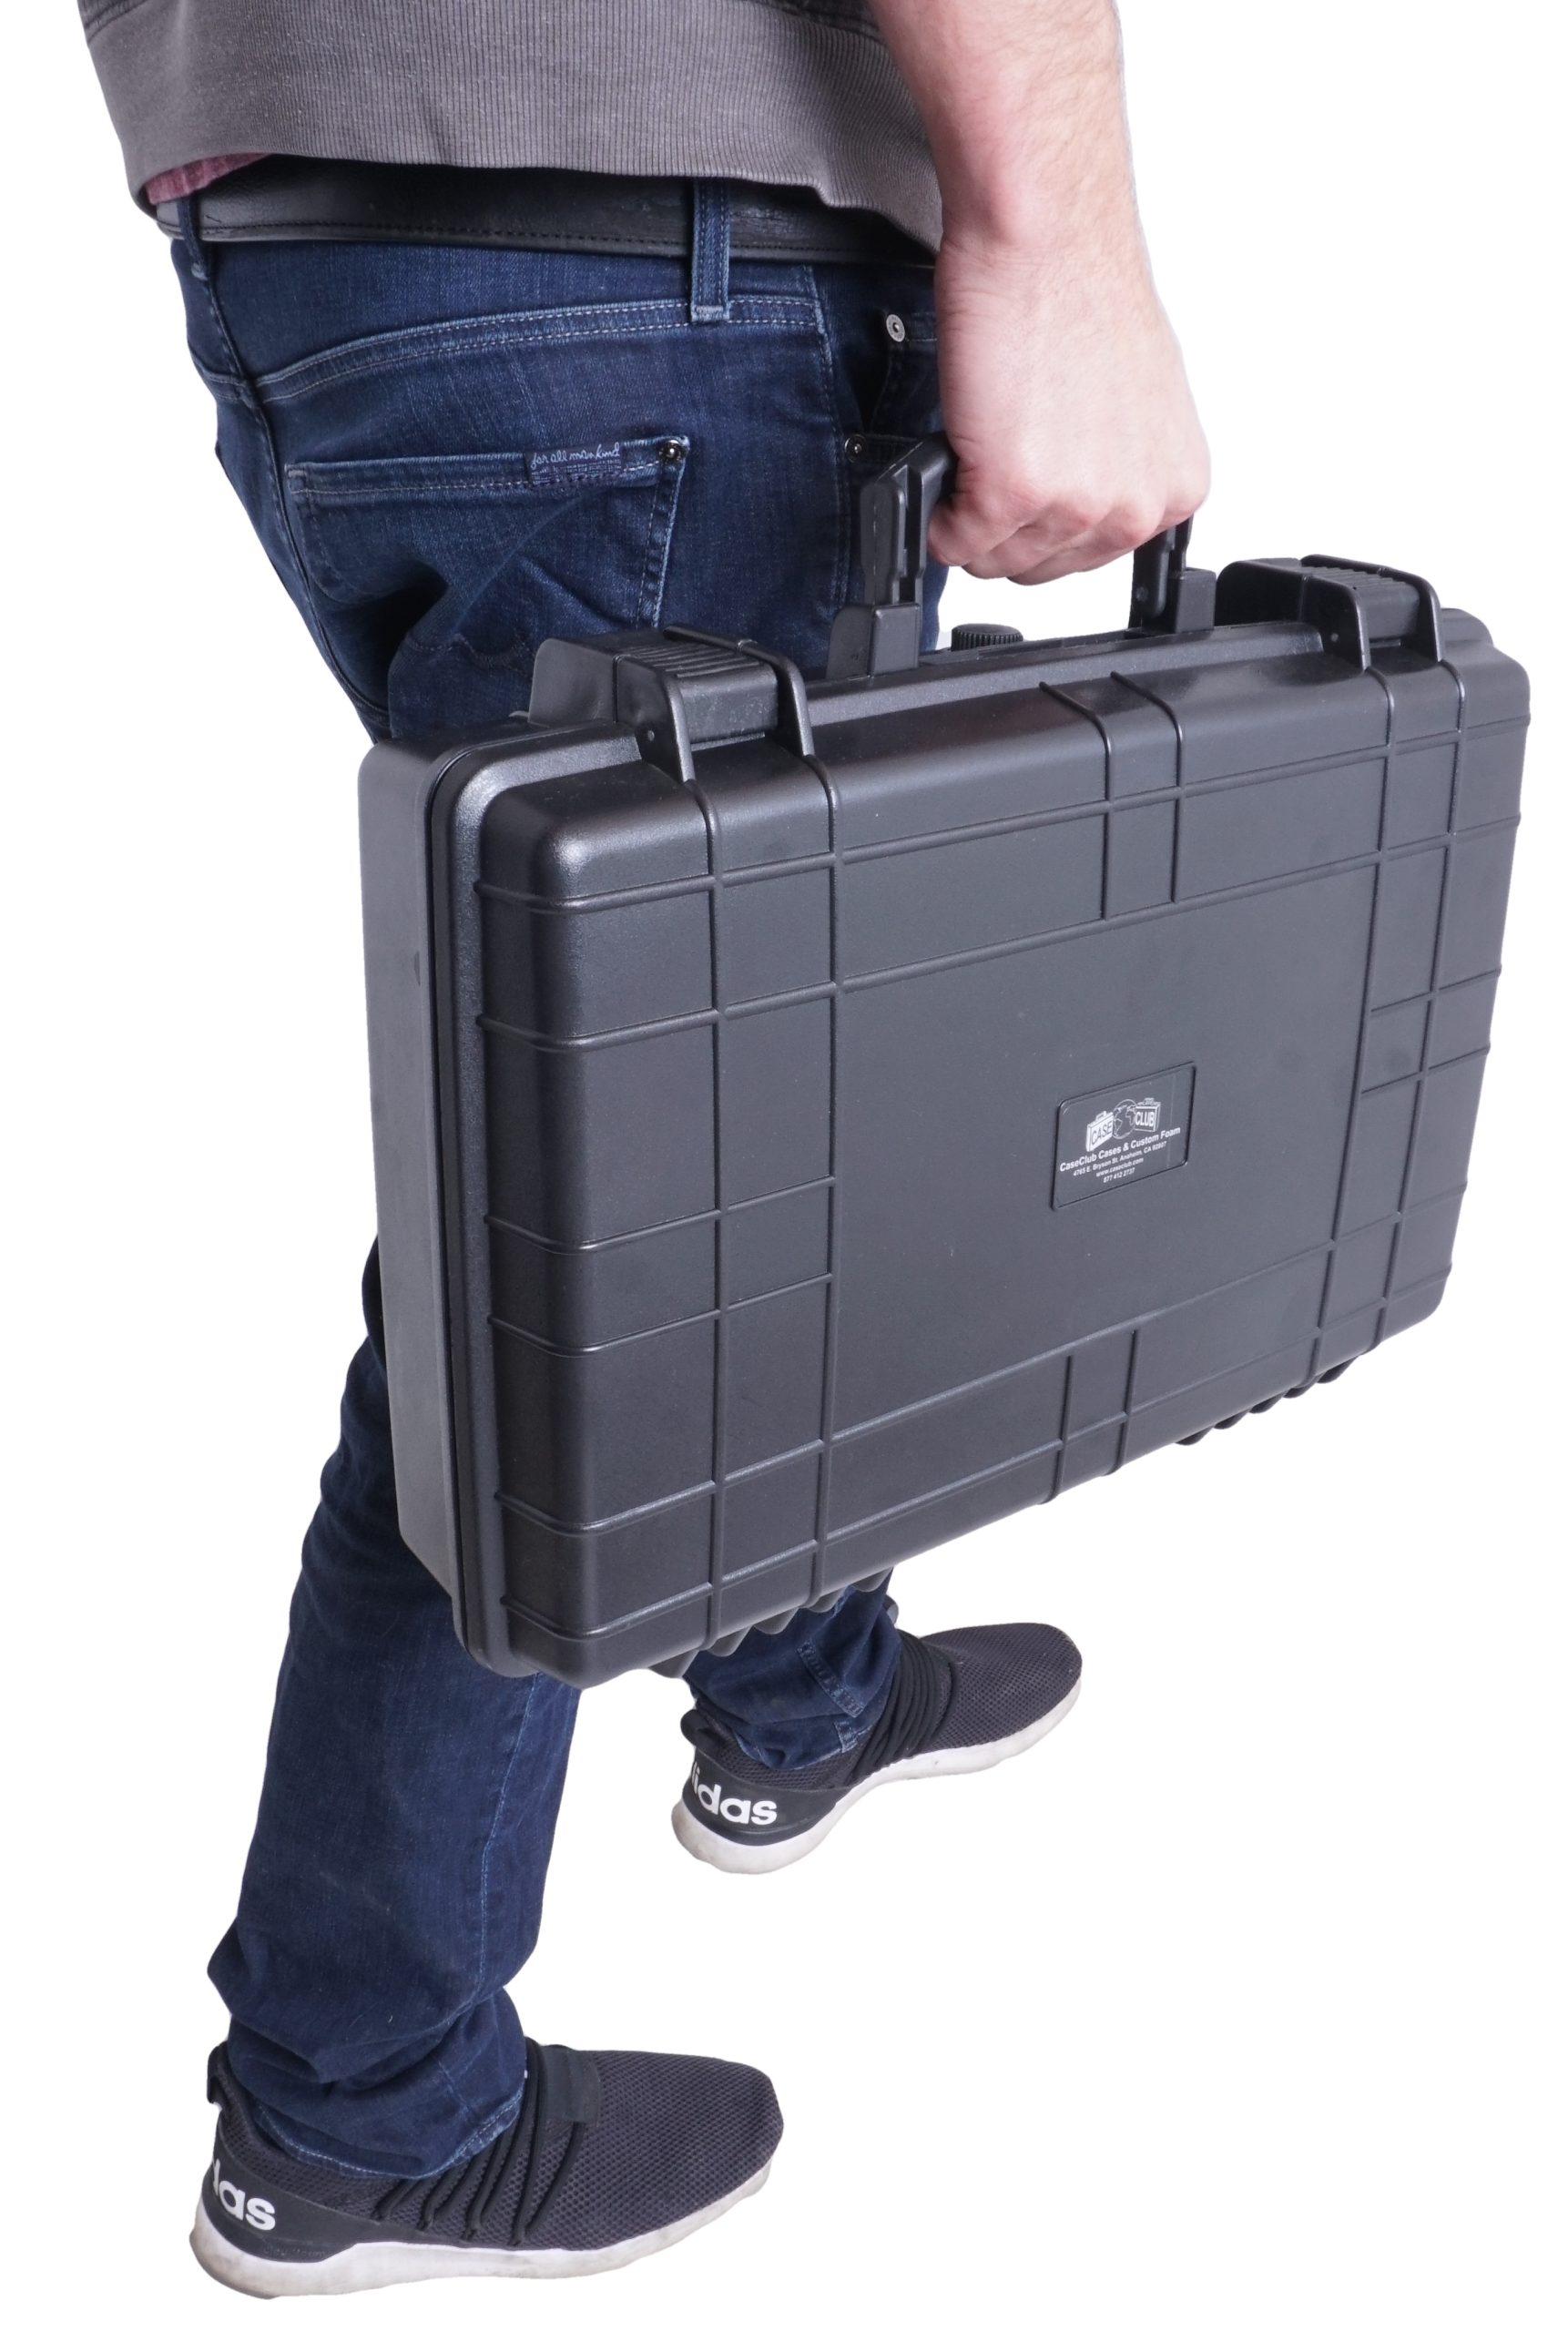 RODECaster Pro 2 Case - Case Club